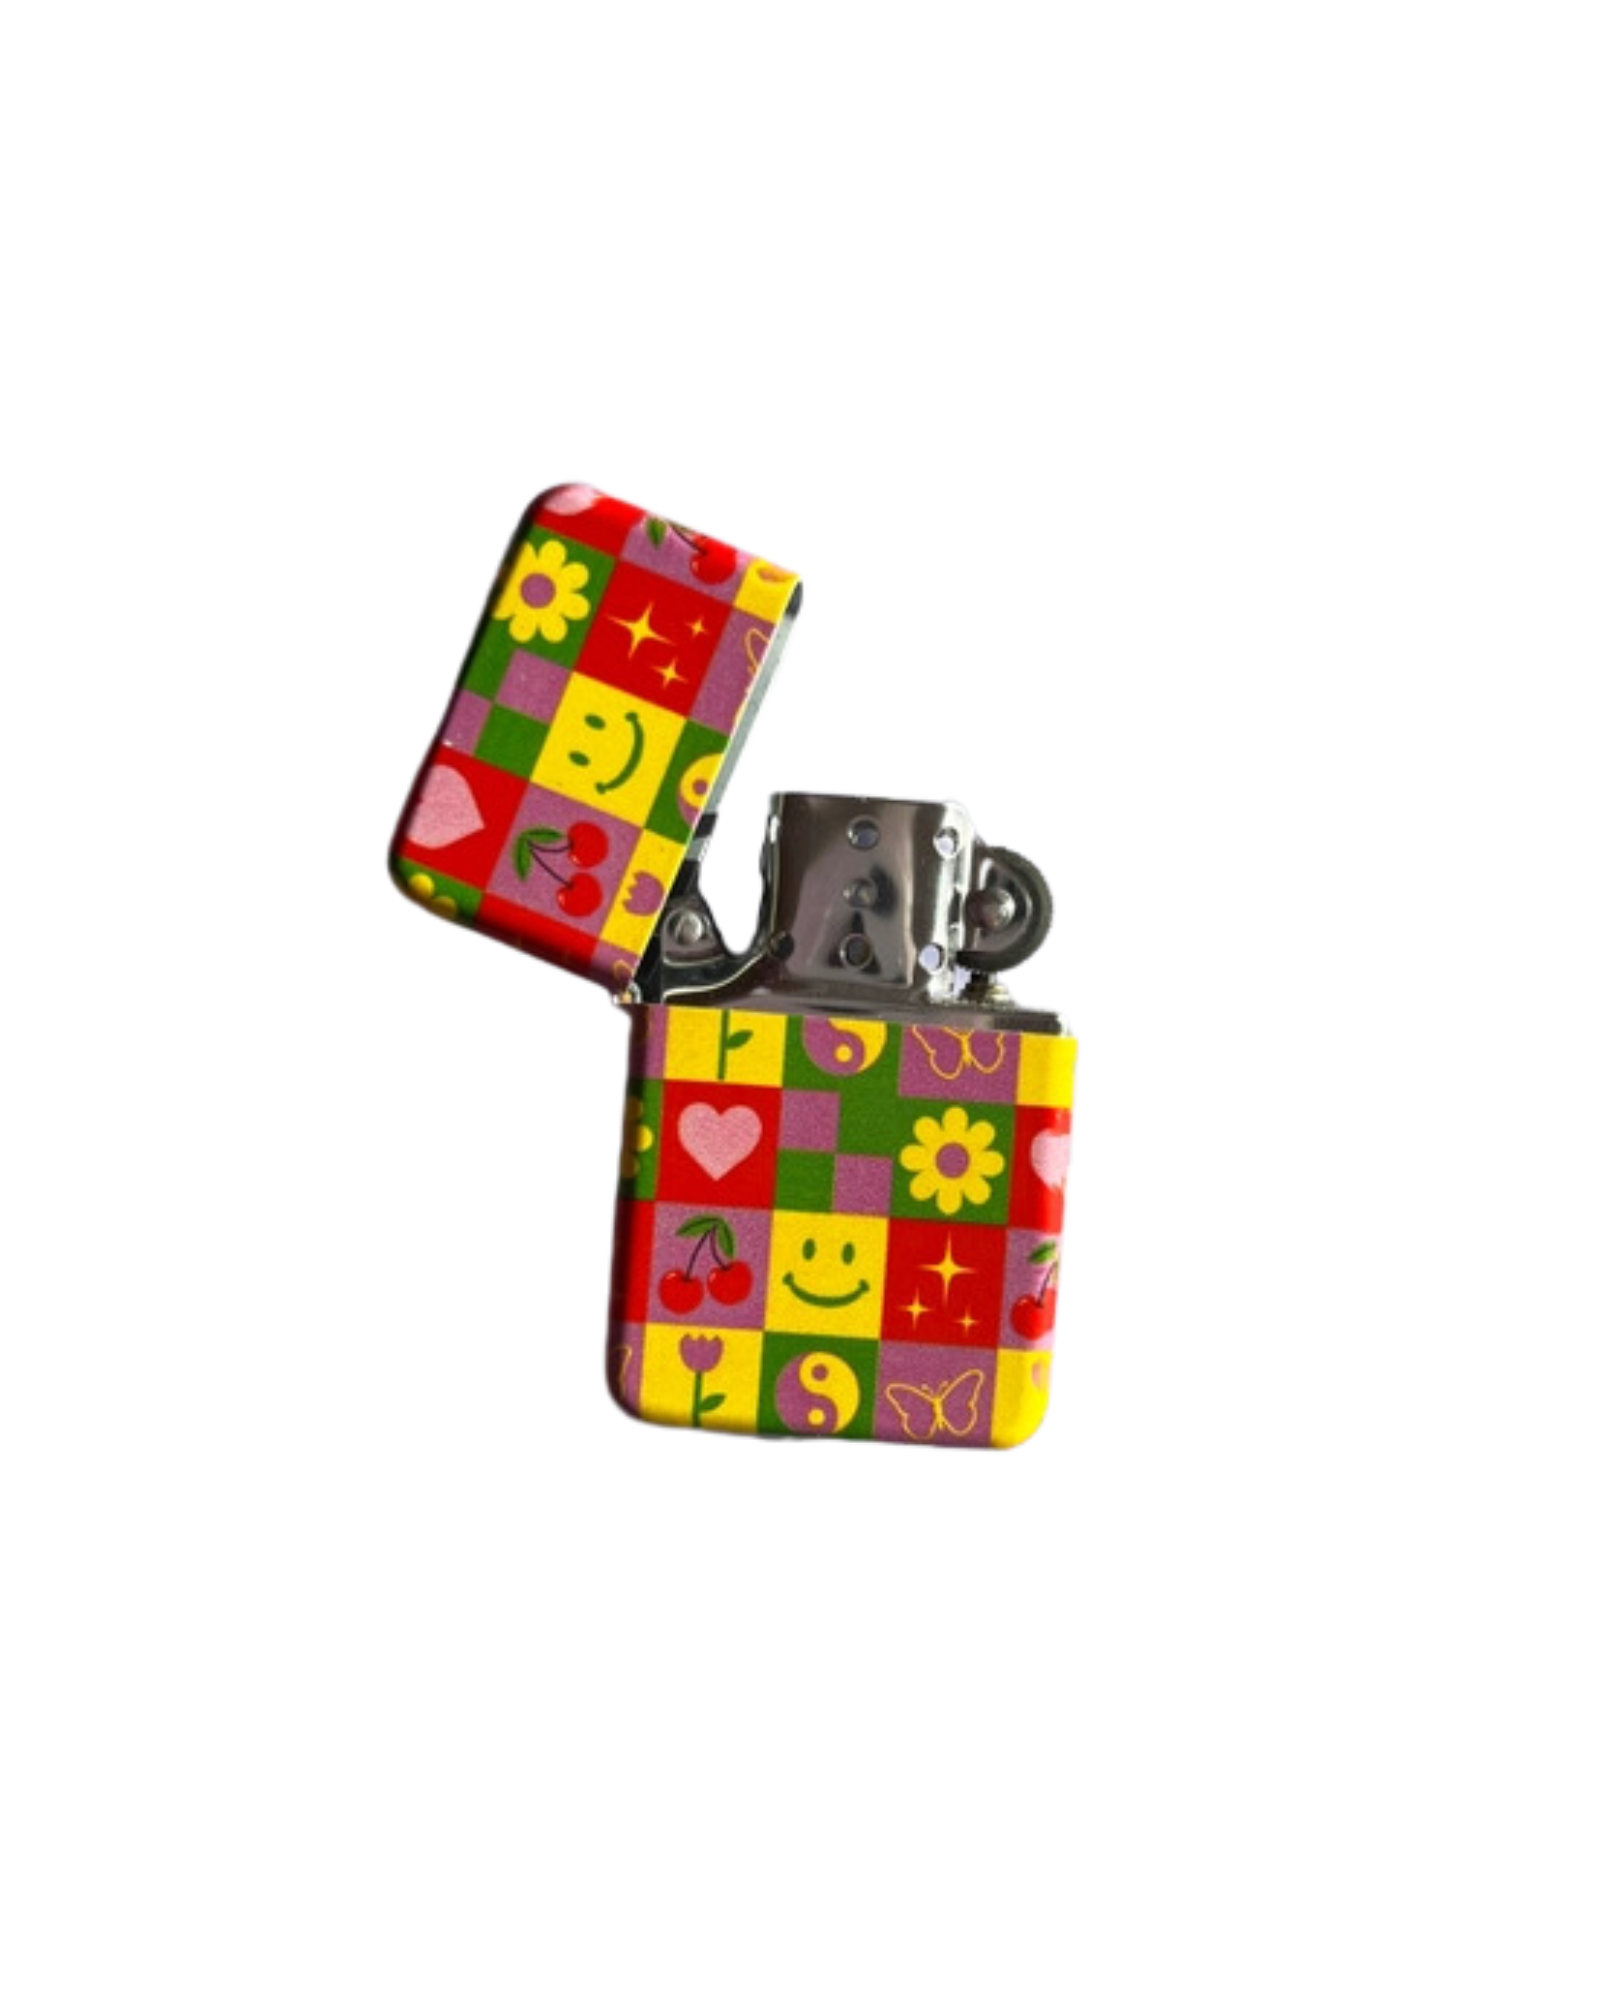 Flip style refillable lighter with brightly colored square pattern including smiley faces, hearts, flowers, cherries, and butterflies